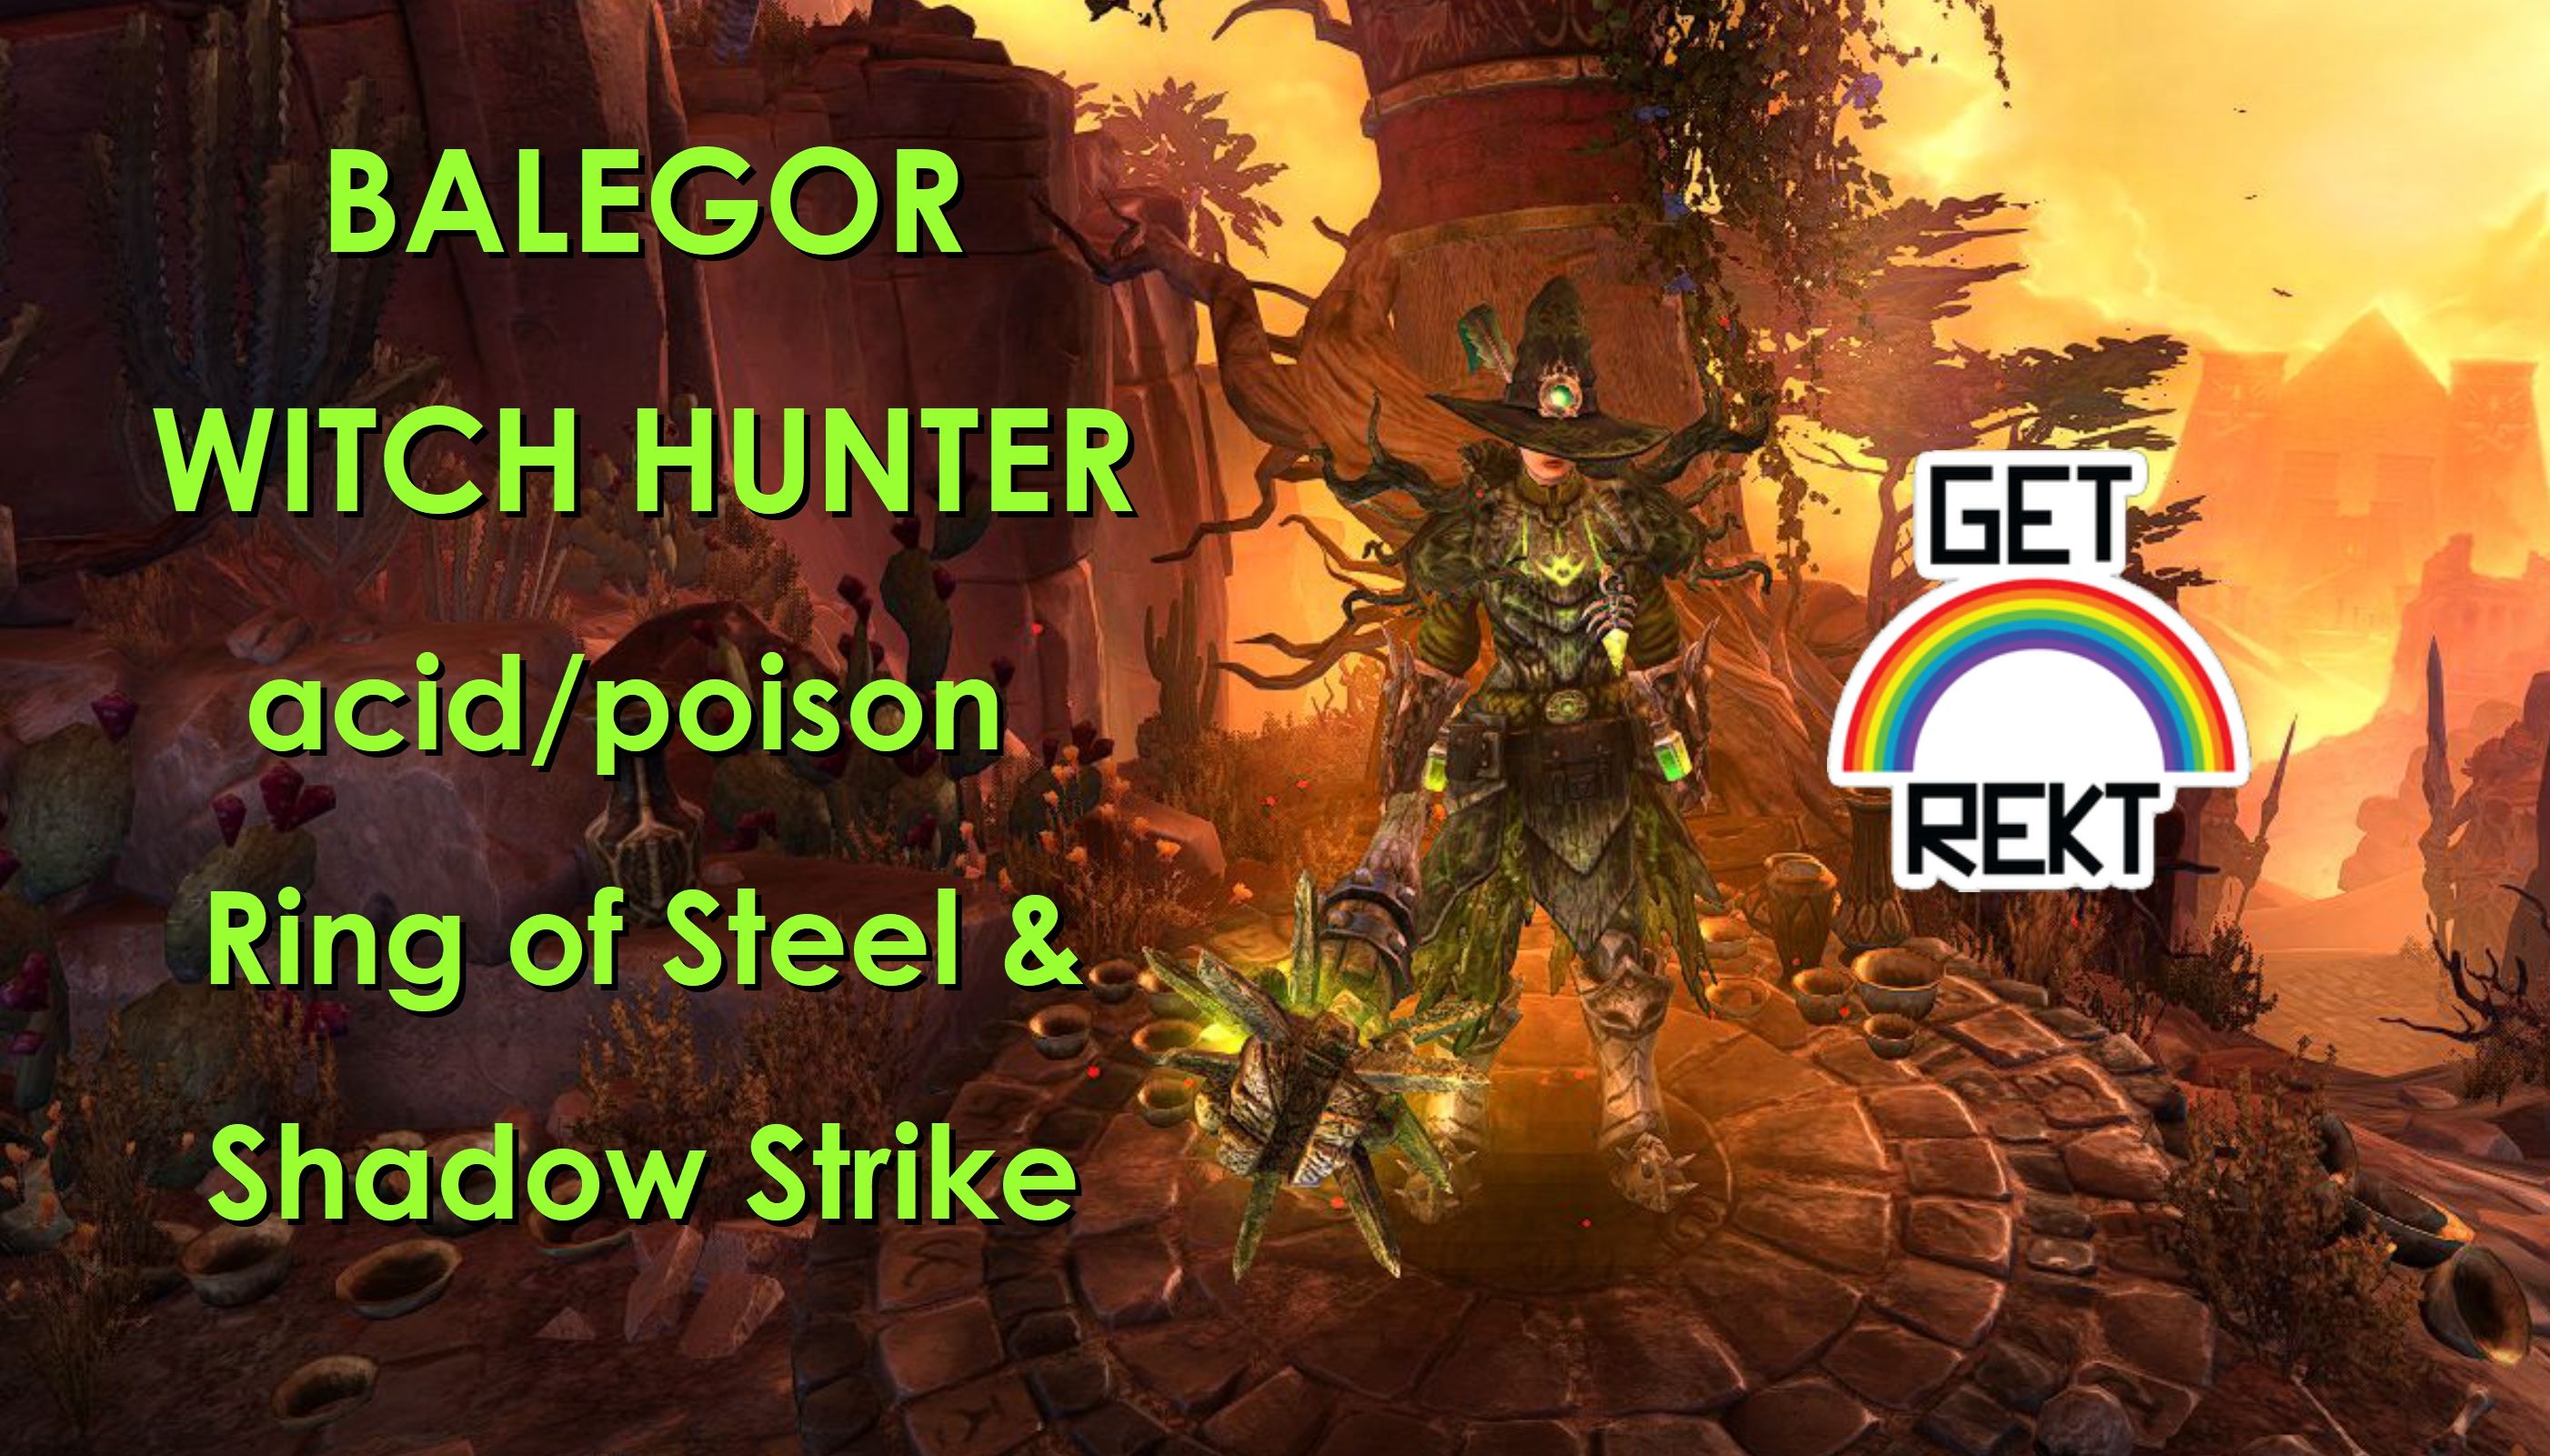 1 1 7 1 1 1 9 0 Hc Balegor Witch Hunter Acid Poison Ros Ss Sr65 Mog Classes Skills And Builds Crate Entertainment Forum